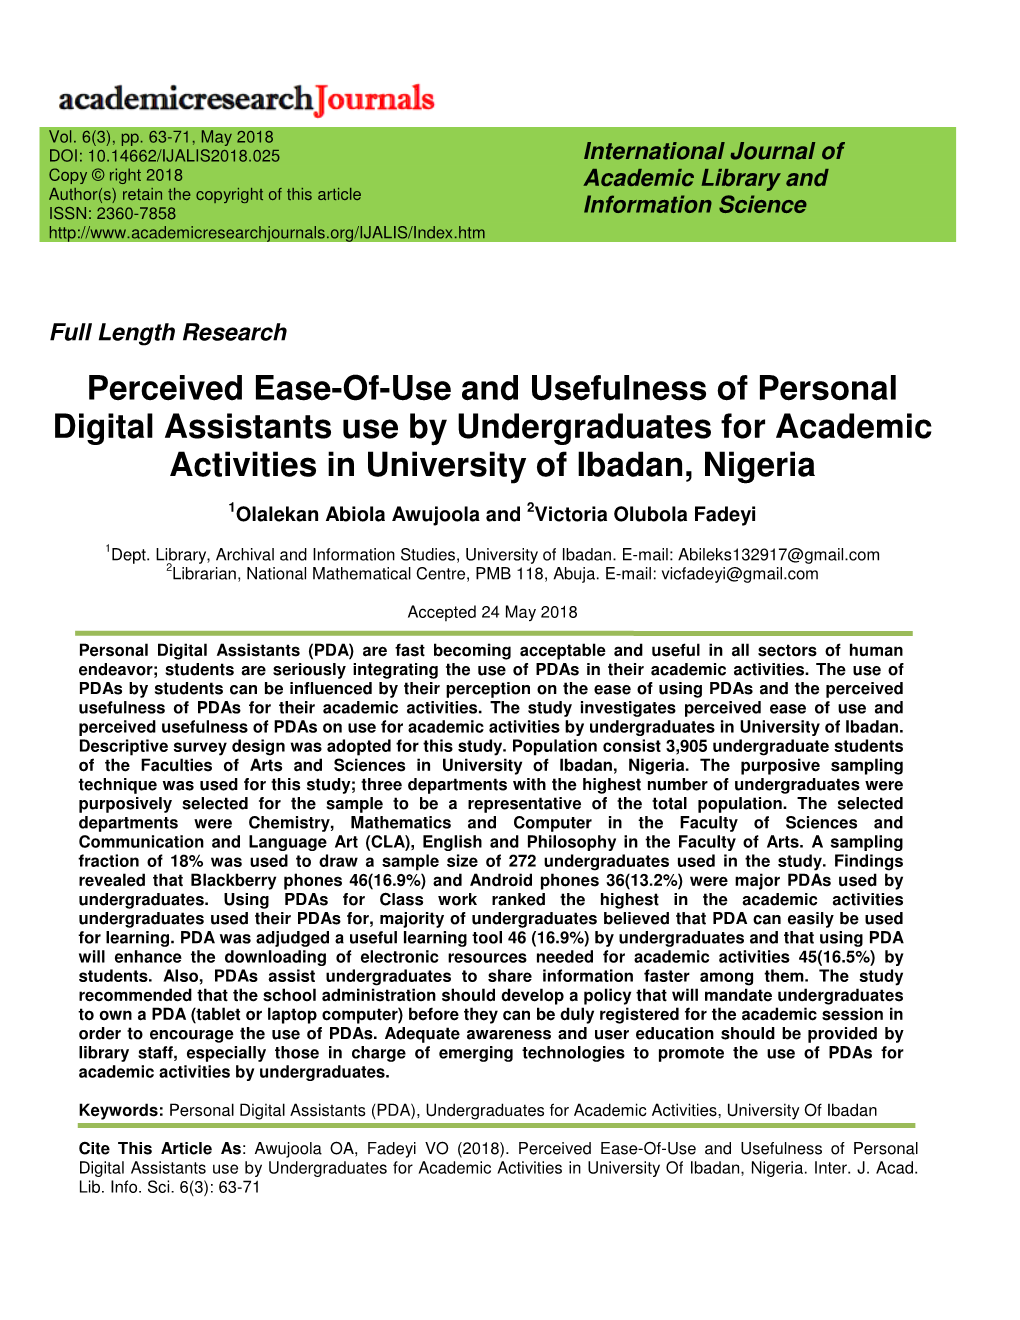 Perceived Ease-Of-Use and Usefulness of Personal Digital Assistants Use by Undergraduates for Academic Activities in University of Ibadan, Nigeria